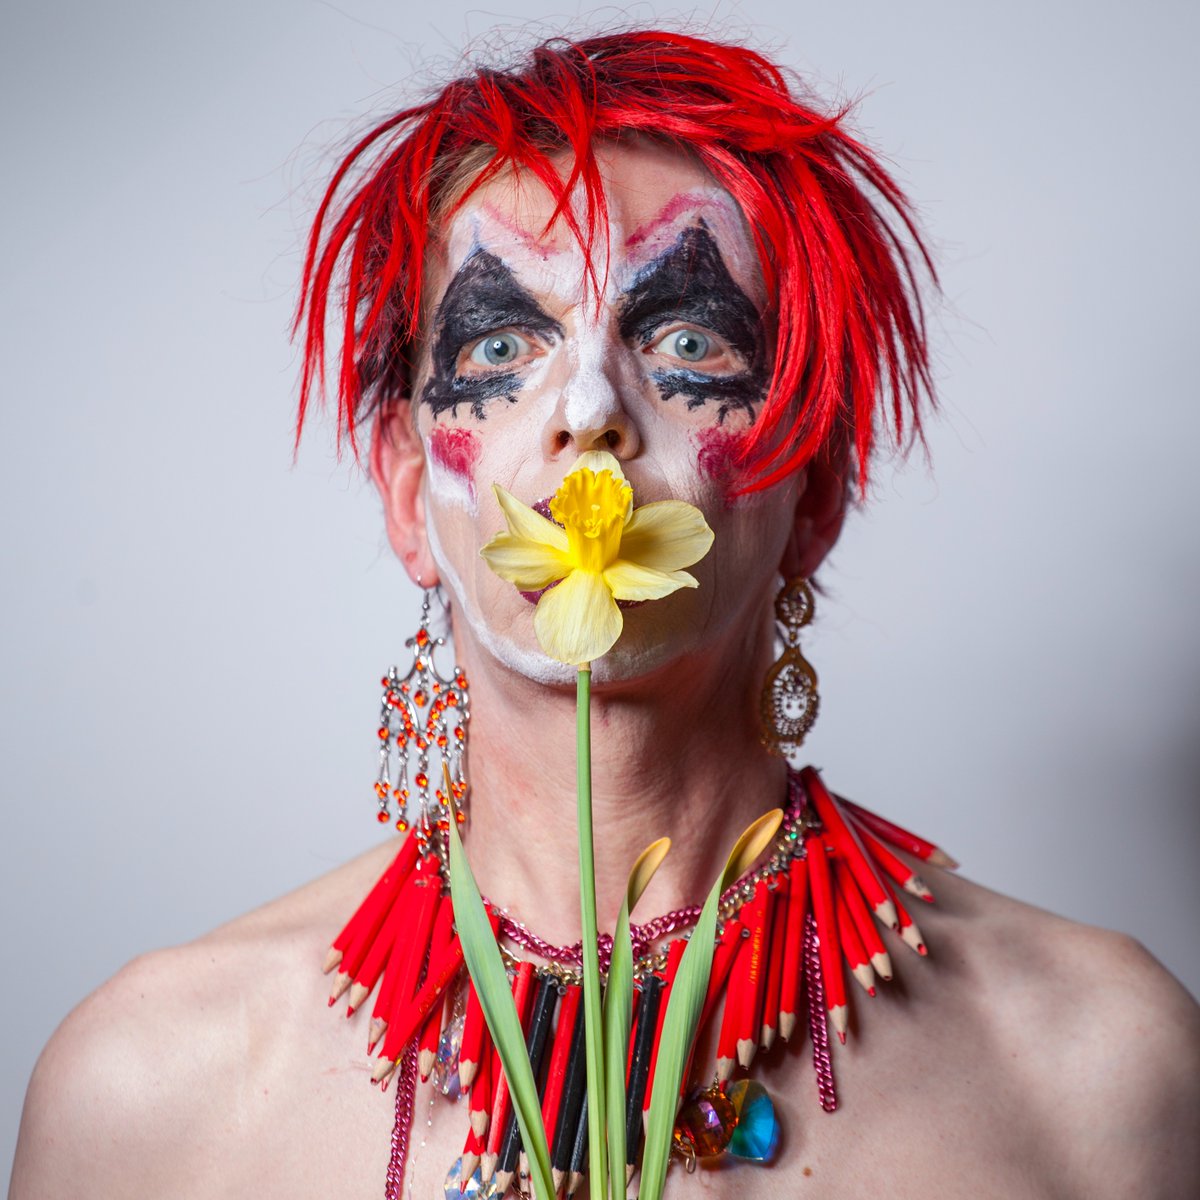 Our next Artist Social is a special one... Join us on 16 April to meet fellow artists from across Greater Manchester, as well as our host Jonathan Mayor (@JonathanMayor) and the legendary David Hoyle. David will be stopping by as part of his residency at Aviva Studios.